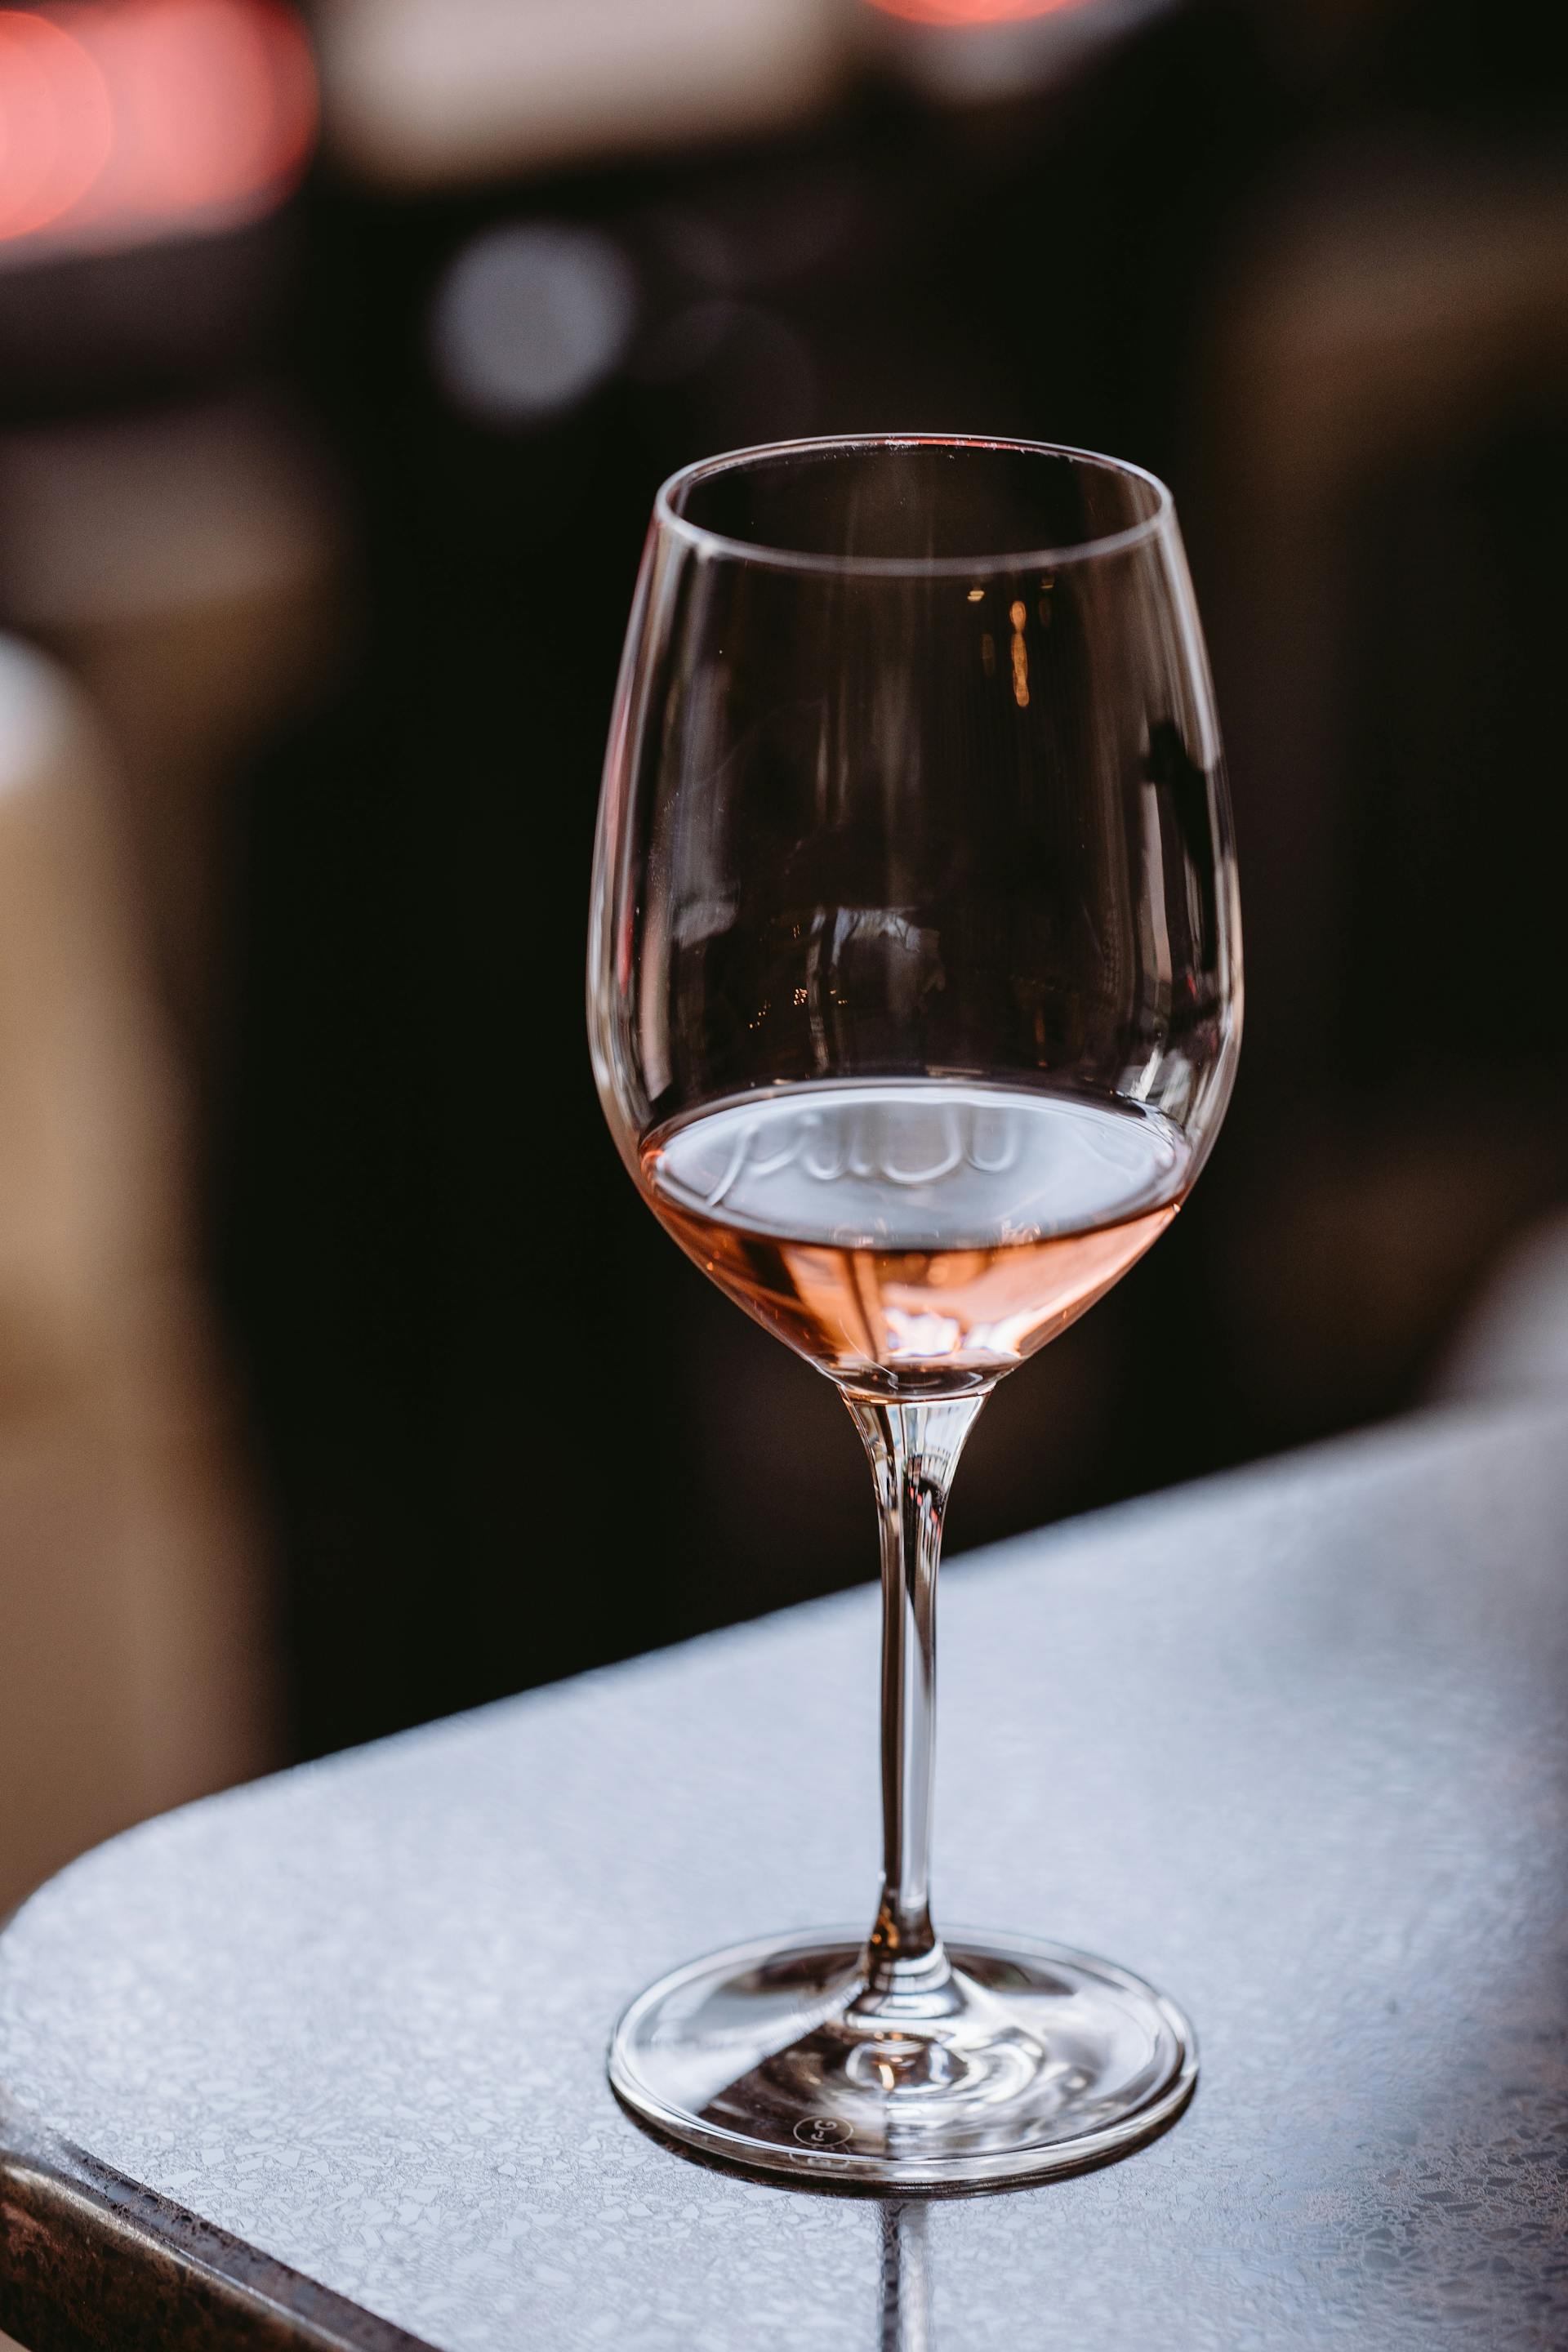 A glass of wine on a table | Source: Pexels